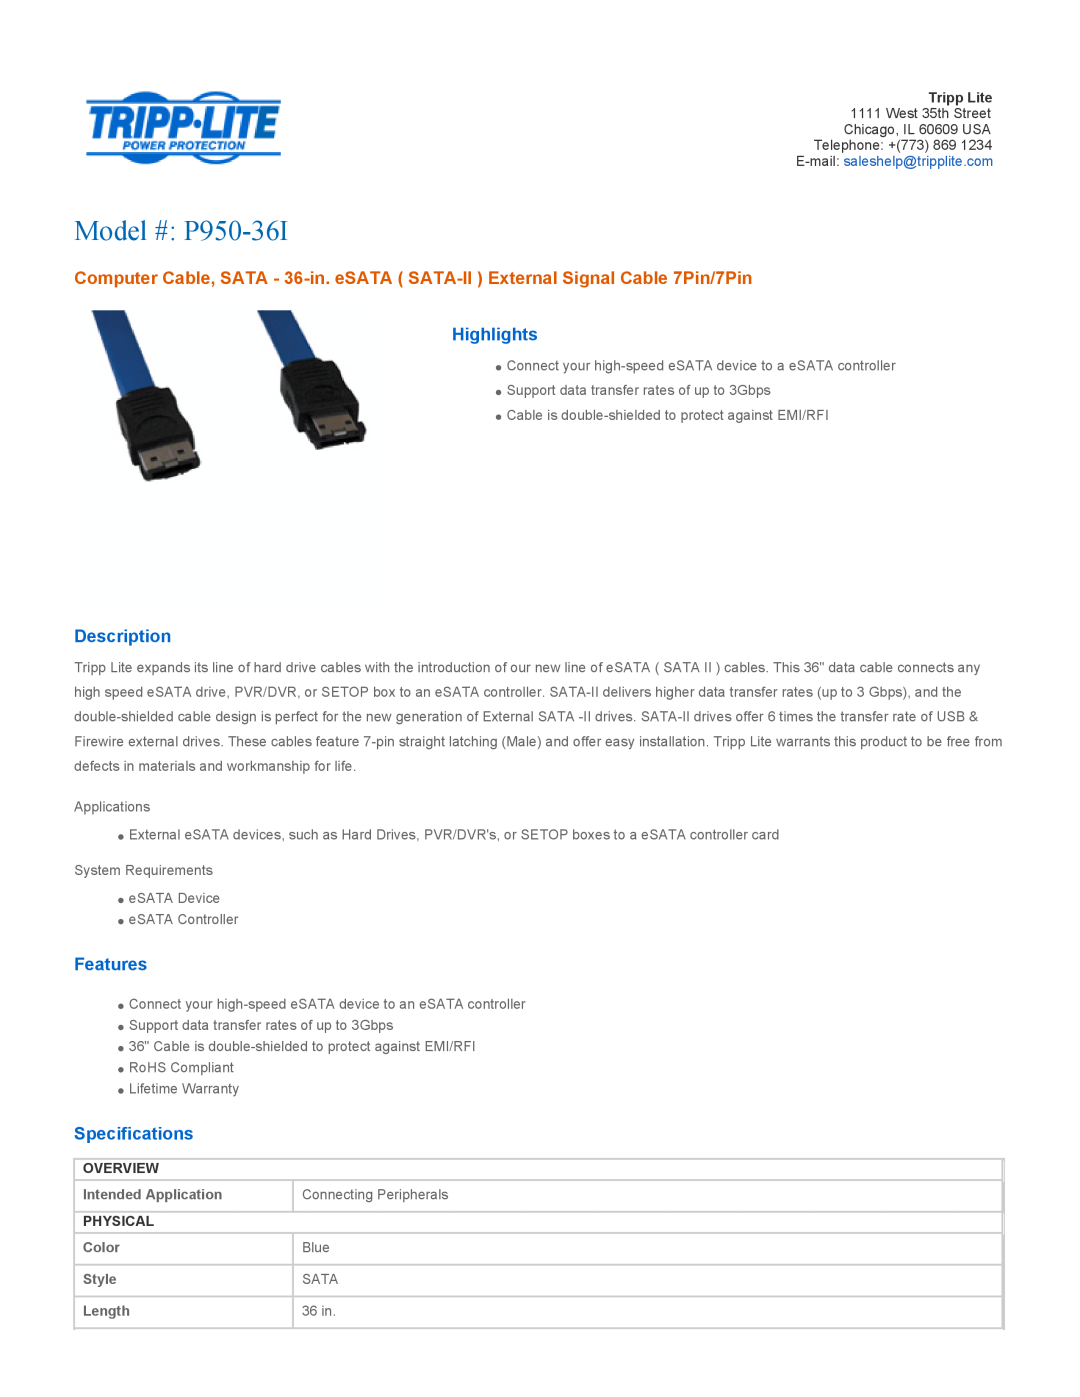 Tripp Lite P950-18I specifications Highlights, Description, Features, Specifications, Overview, Intended Application, Blue 